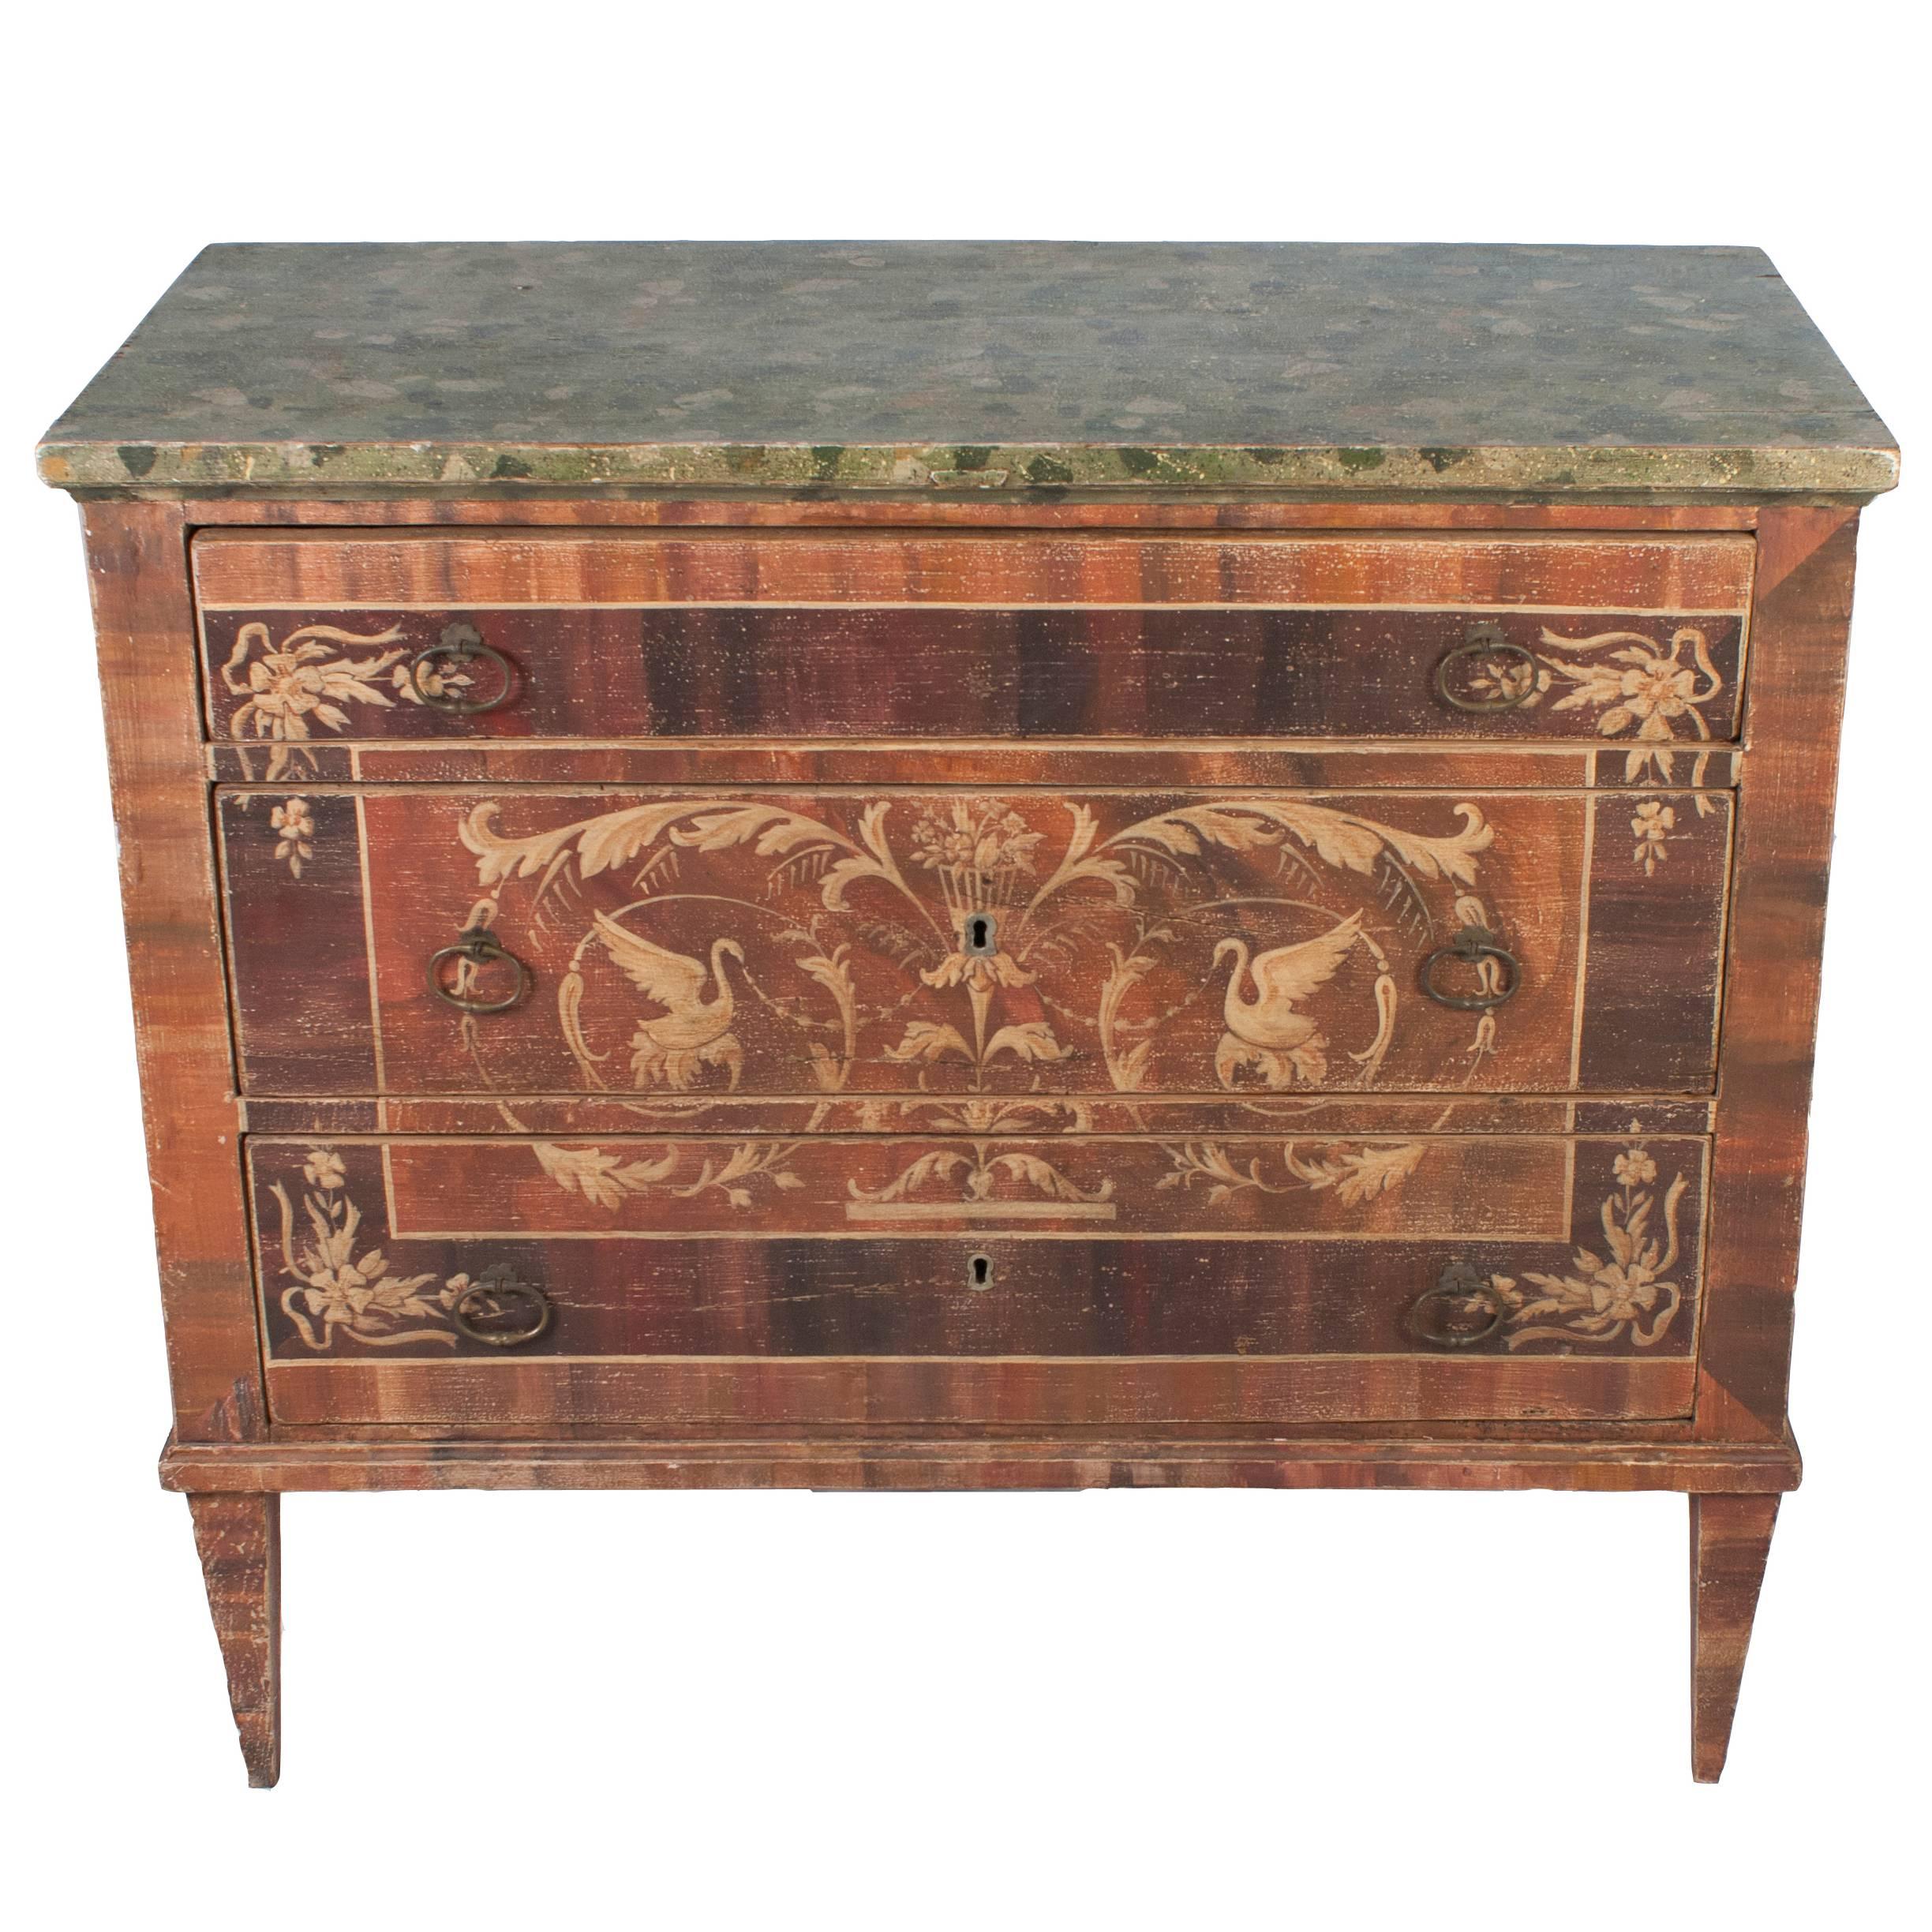 A Painted Italian Commode with Faux Marble Top